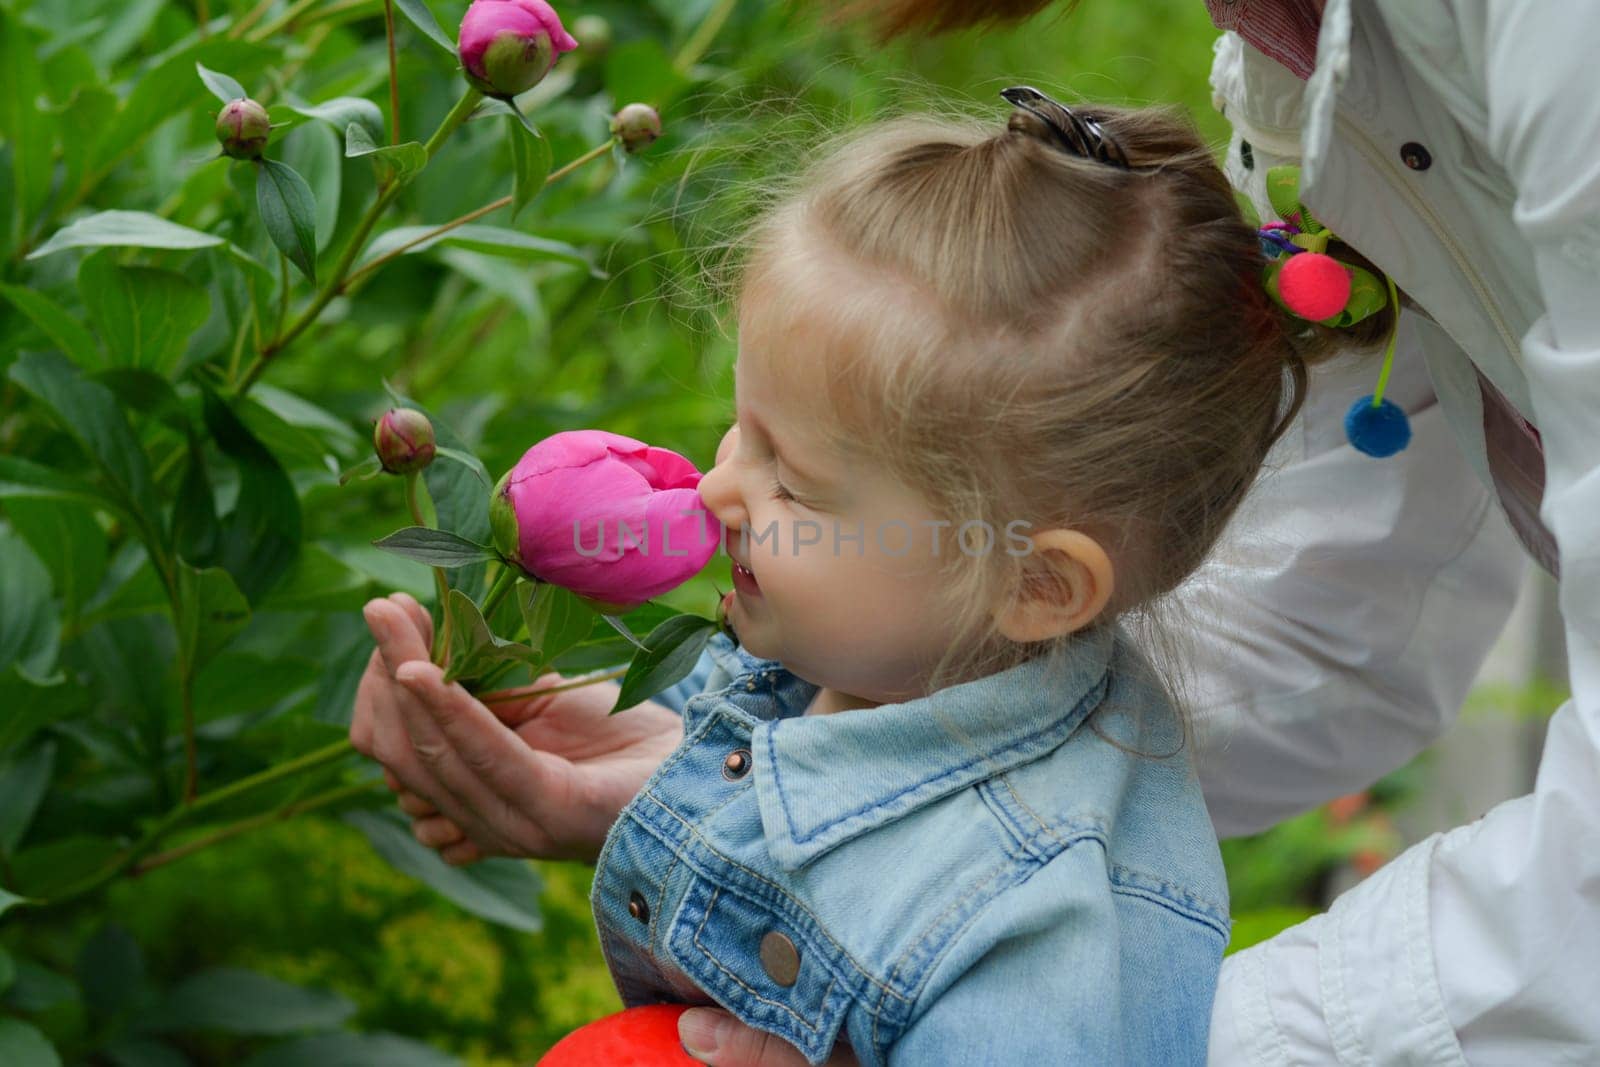 The little girl in the garden with peonies flowers. by Godi